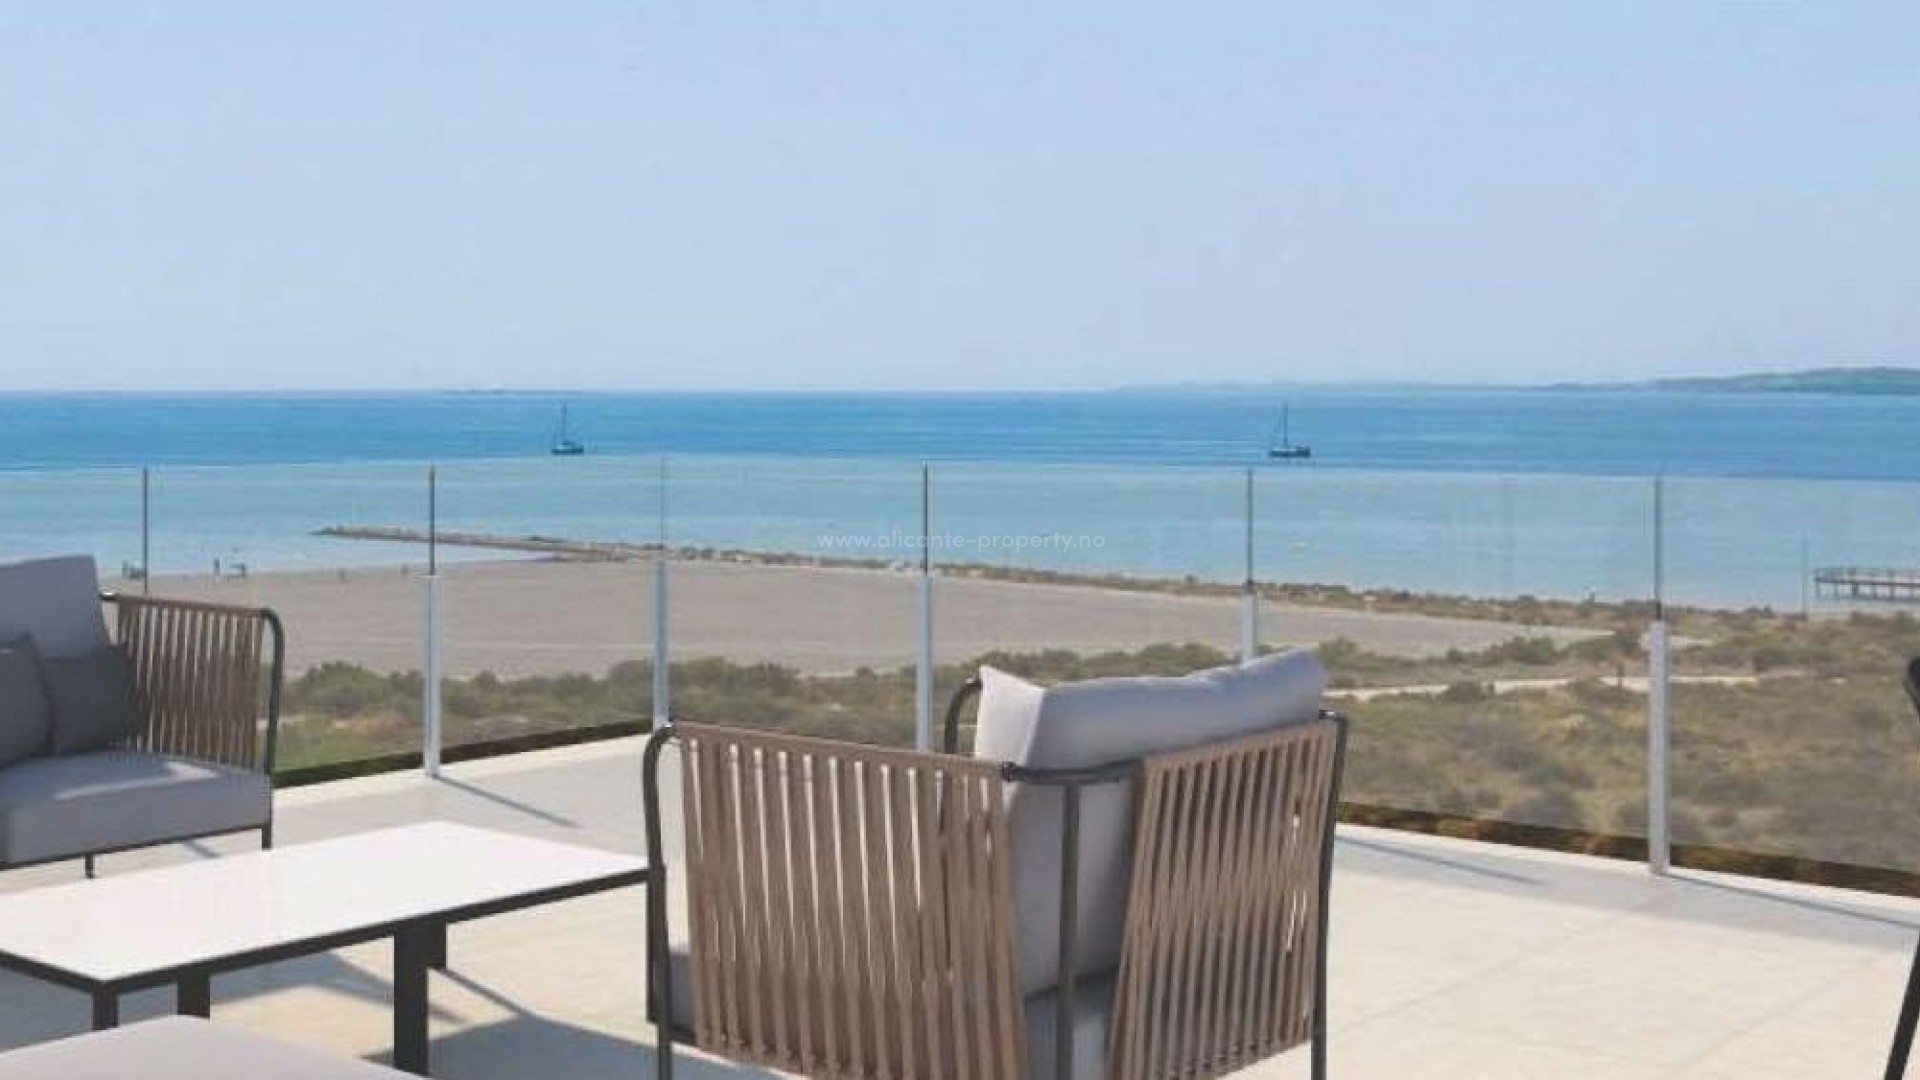 Luxurious modern apartment complex in Santa Pola, Alicante, 2/3 bedrooms, 2 bathrooms, swimming pool (beach entrance) with beds, large terraces,